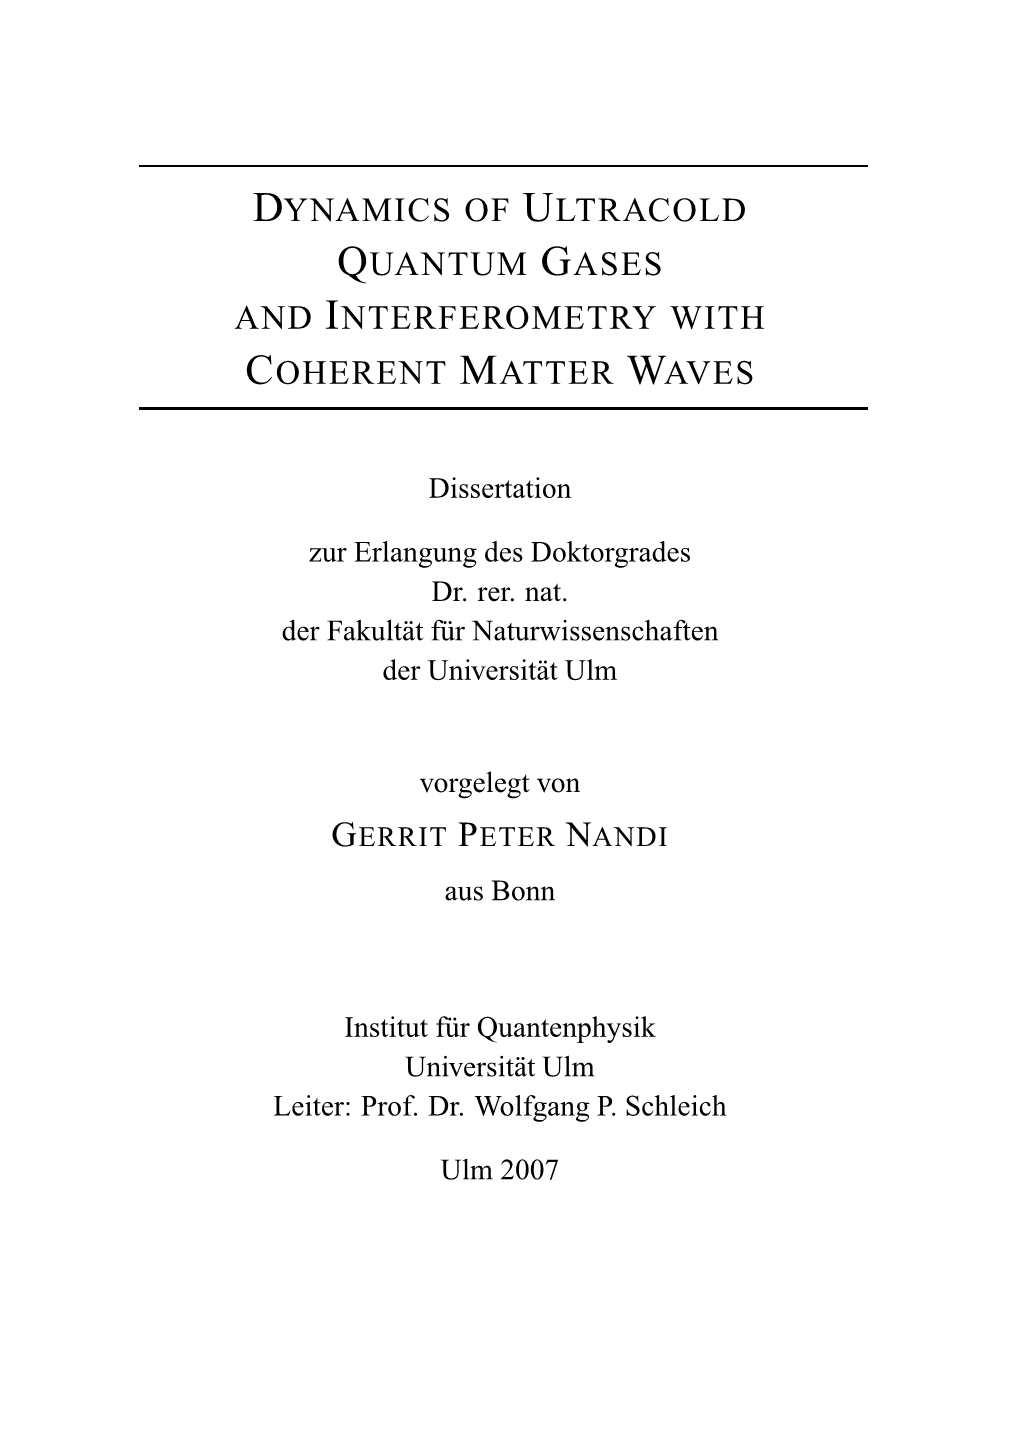 Dynamics of Ultracold Quantum Gases and Interferometry with Coherent Matter Waves